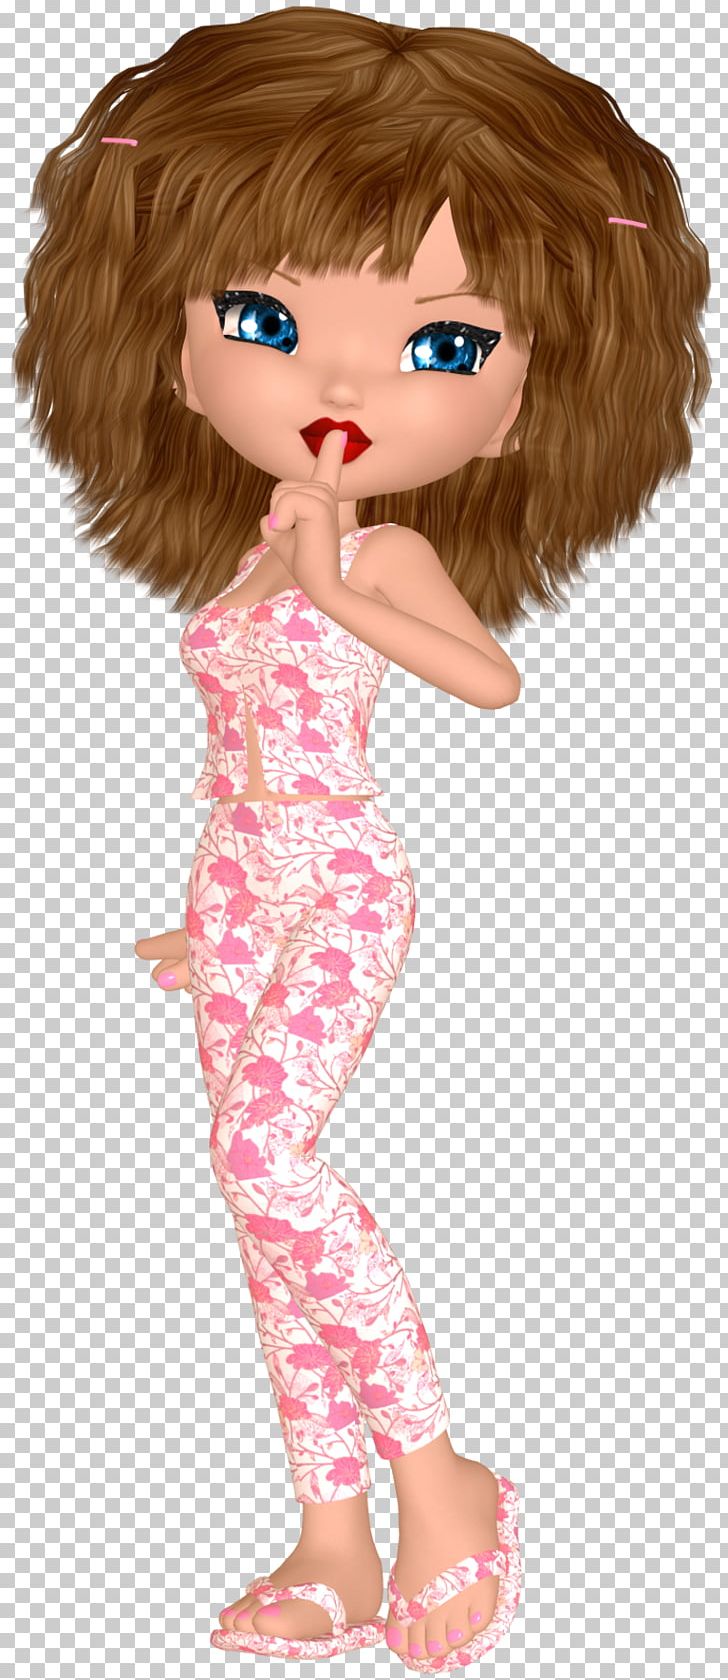 Doll Drawing Child Biscuits PNG, Clipart, Amigurumi, Biscuit, Biscuits, Brown Hair, Cartoon Free PNG Download